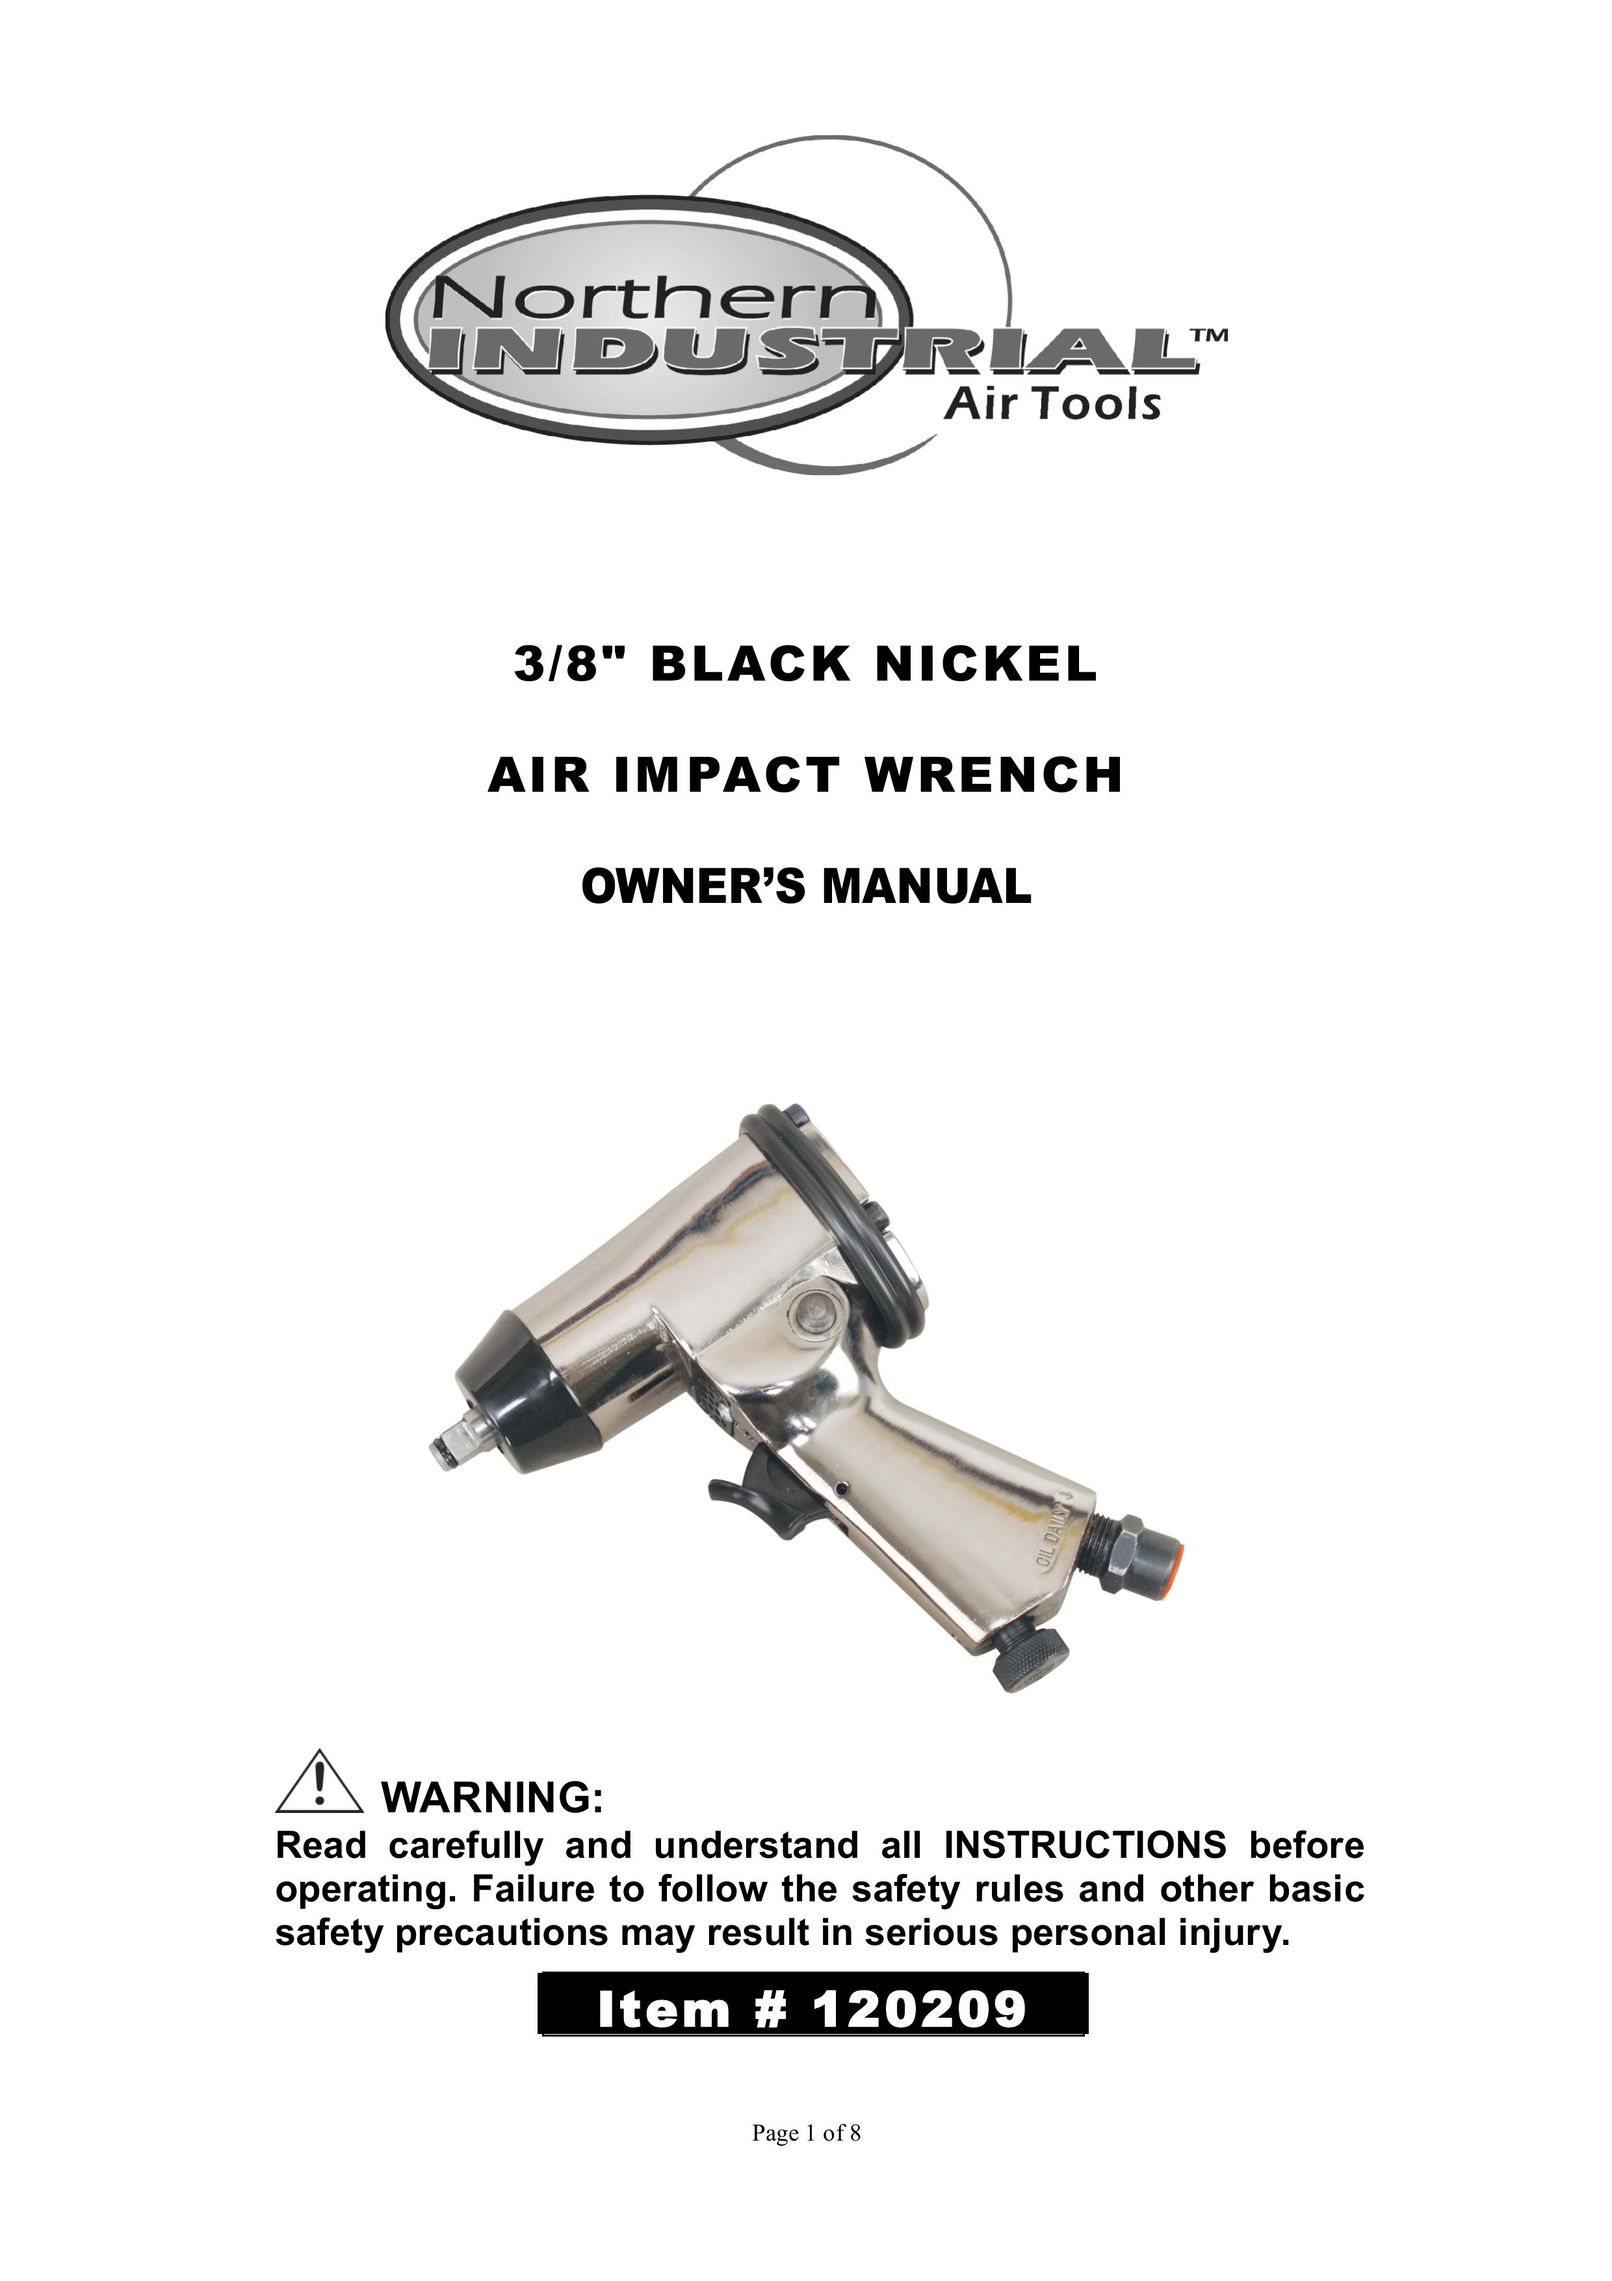 Northern Industrial Tools NORTHERN INDUSTRIAL BLACK NICKEL AIR IMPACT WRENCH Impact Driver User Manual